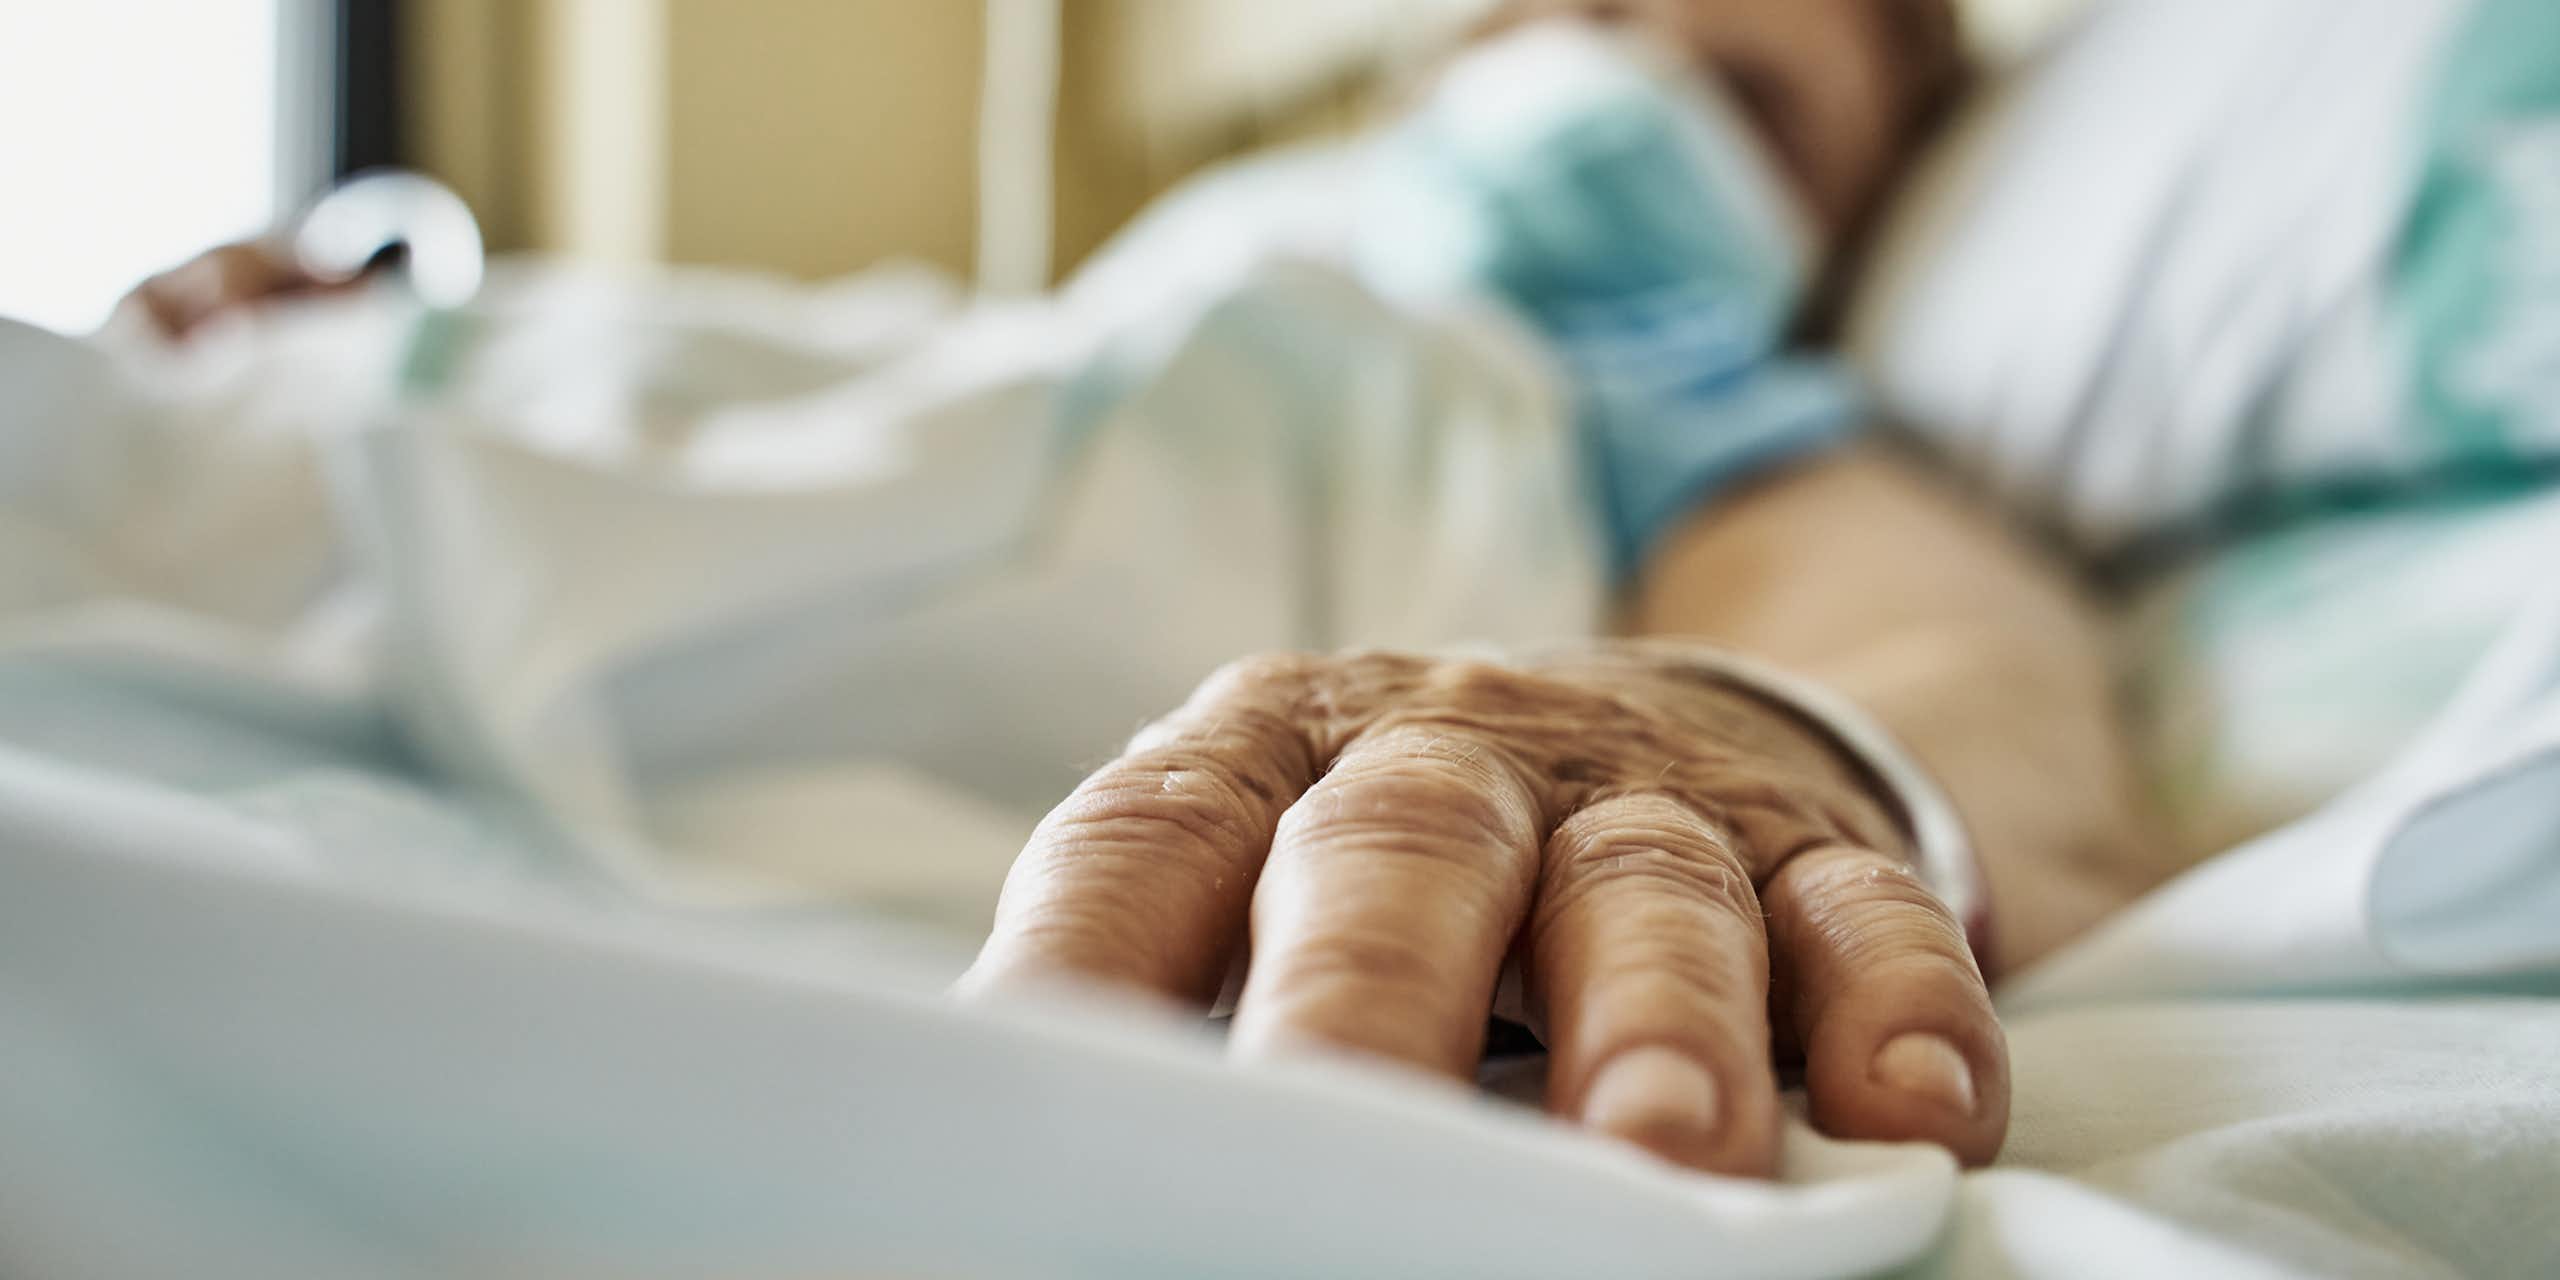 Patient wearing mask lying on hospital bed, hand extended toward camera